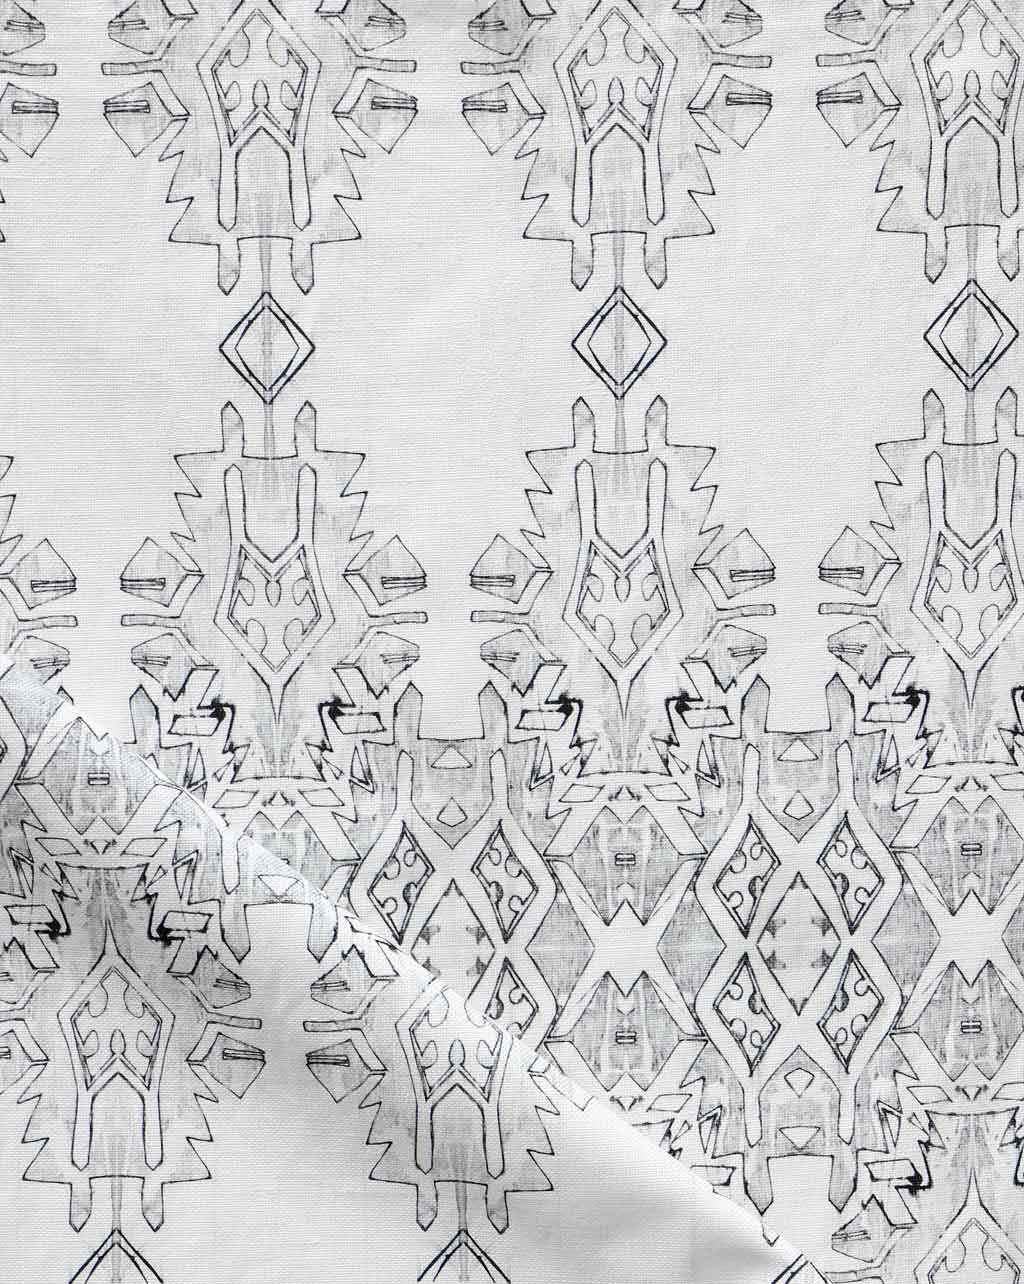 A versatile Akimbo 2 Fabric||Greyscale with a graphic geometric pattern on it.